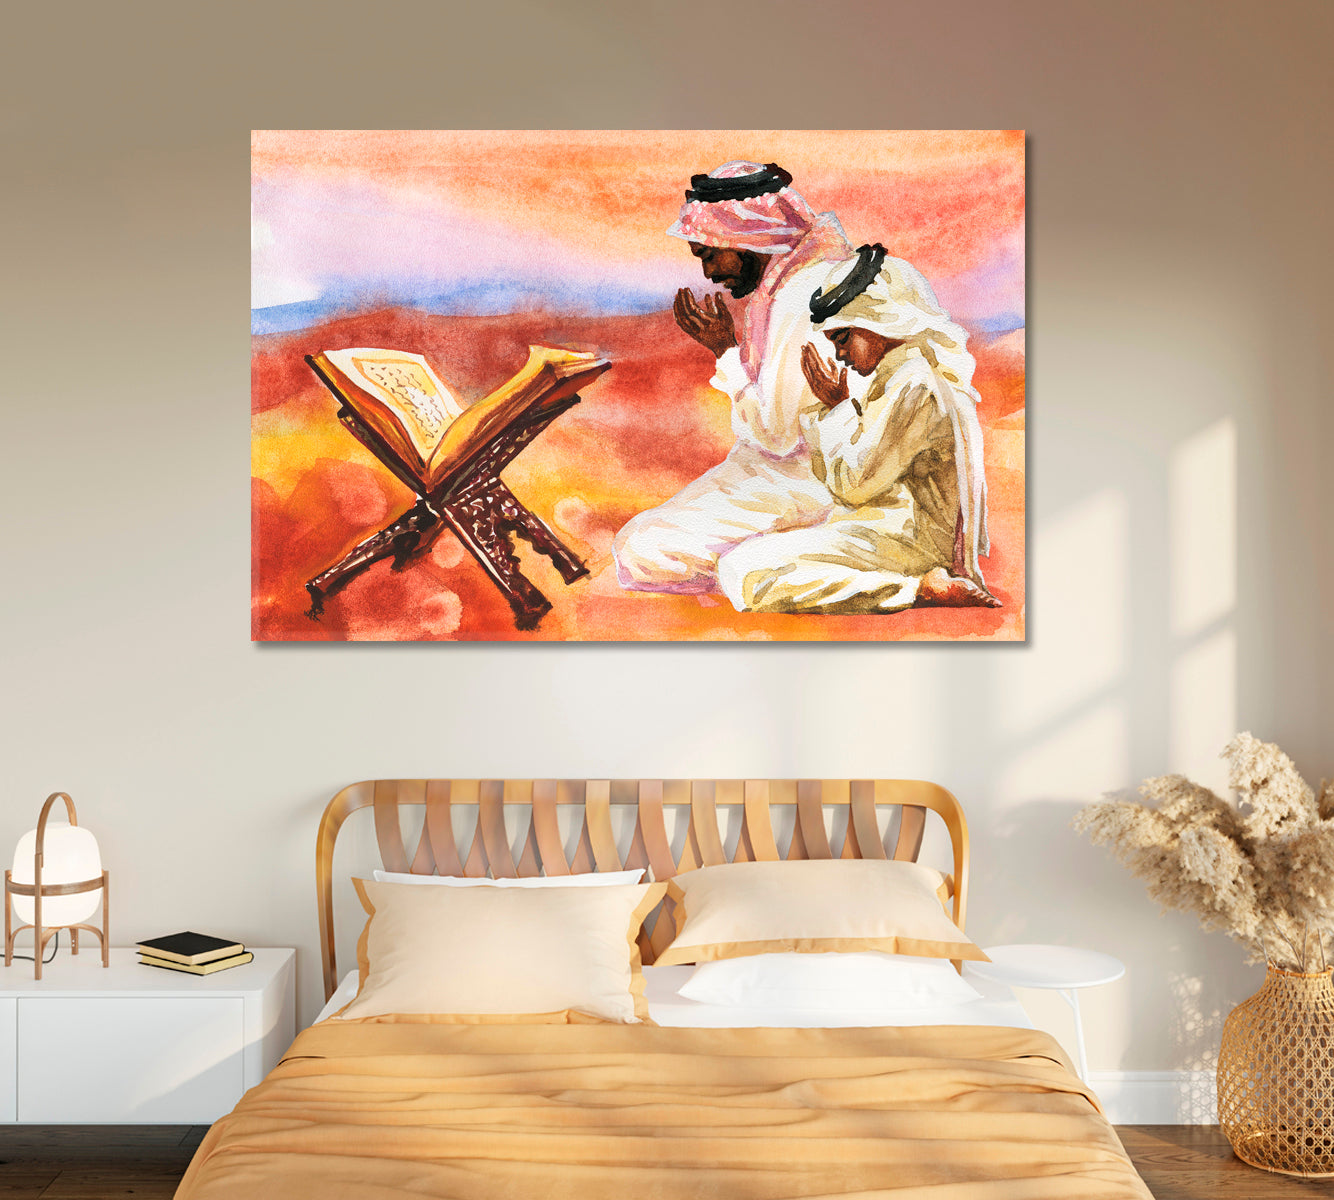 Muslim Father and Son Praying Together Canvas Print-Canvas Print-CetArt-1 Panel-24x16 inches-CetArt